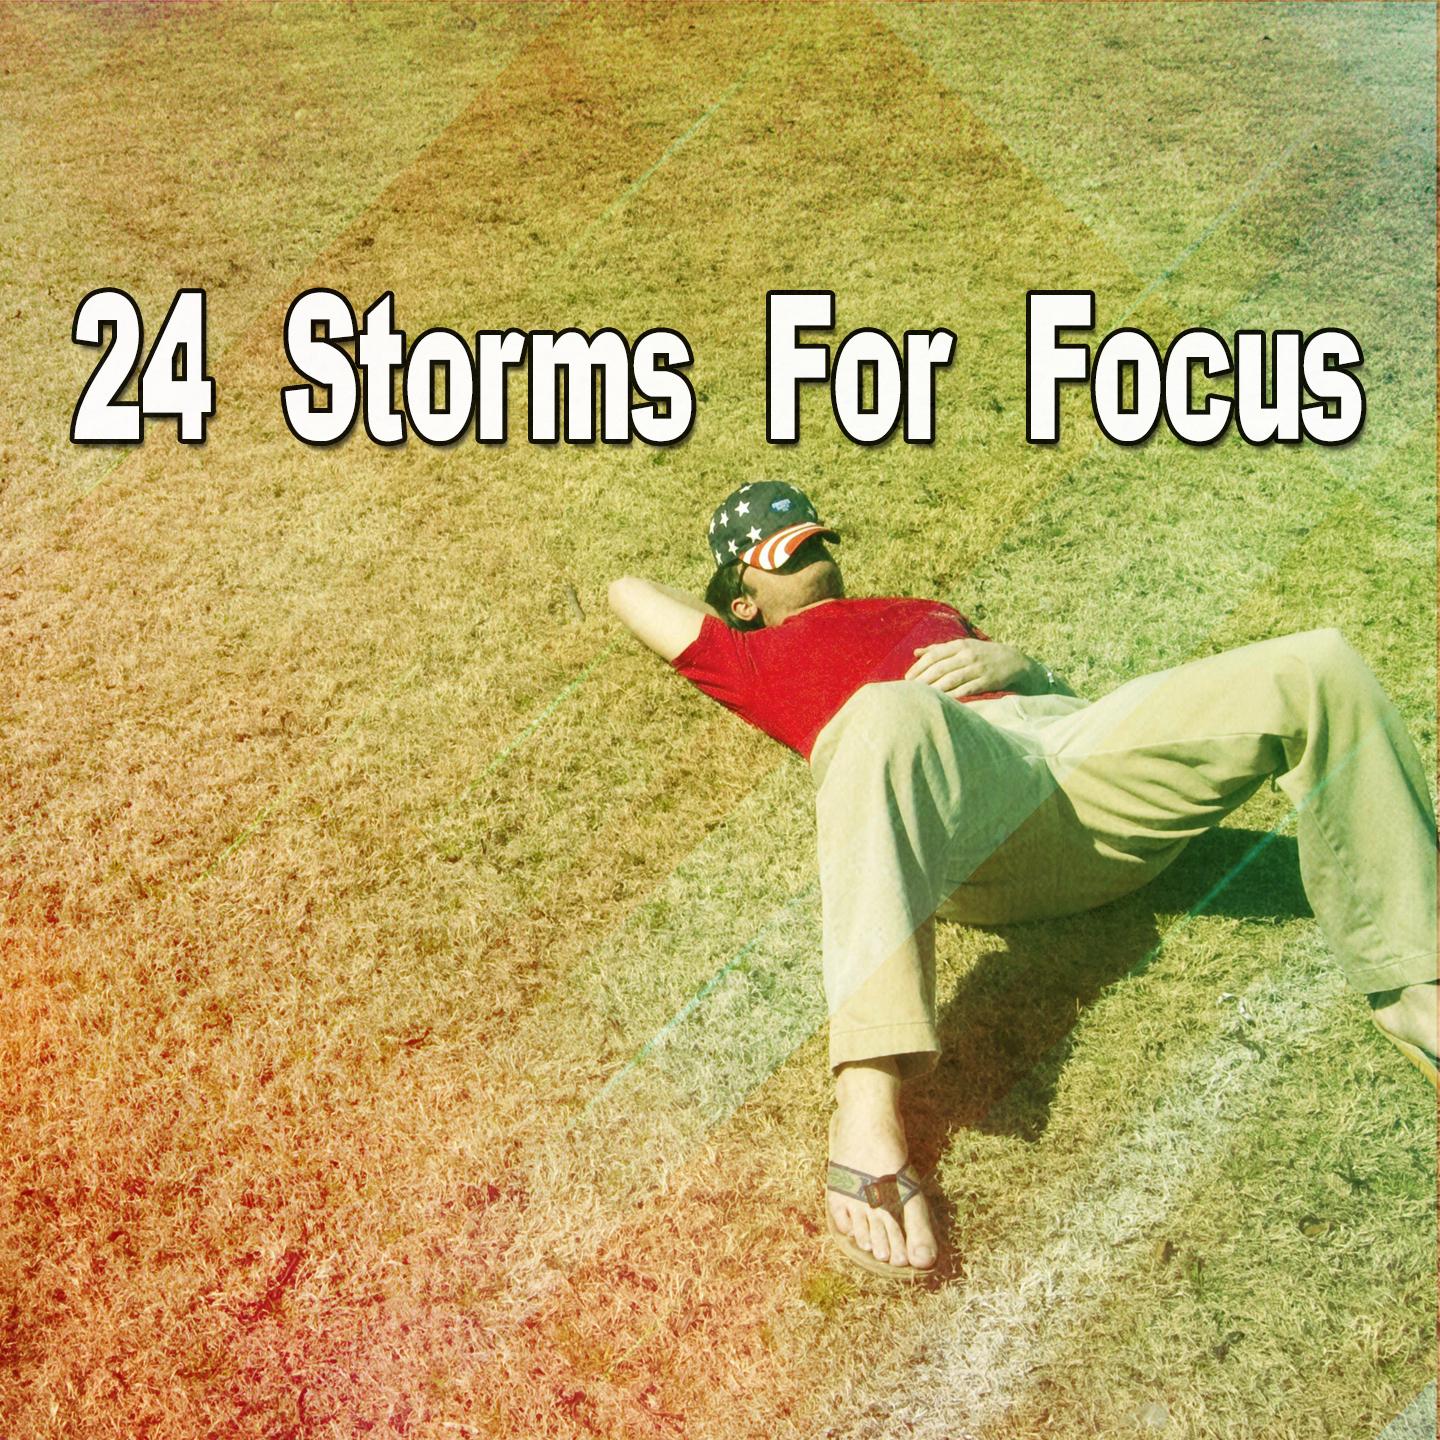 24 Storms for Focus